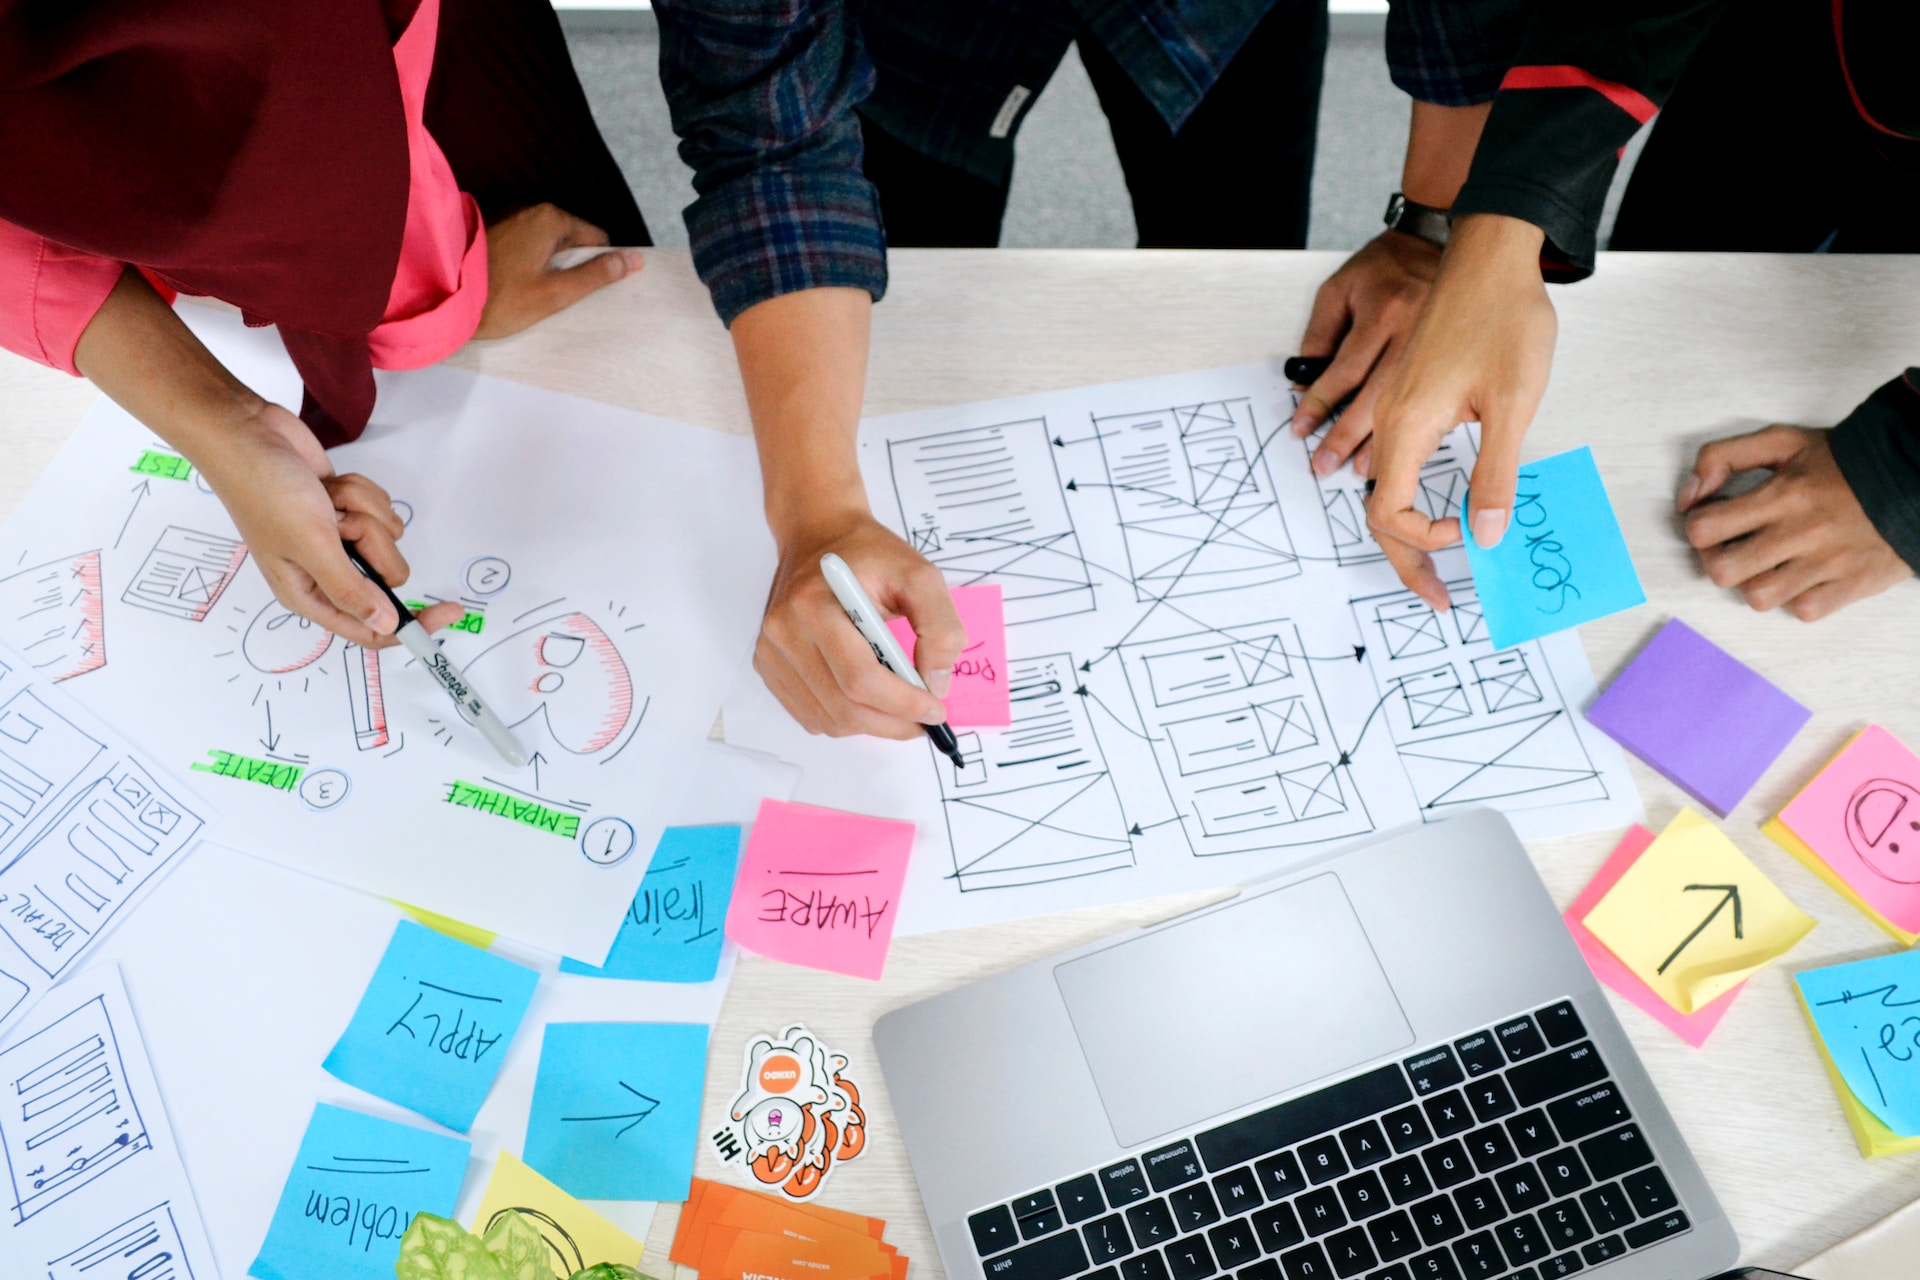 How to Get Started in UX Design